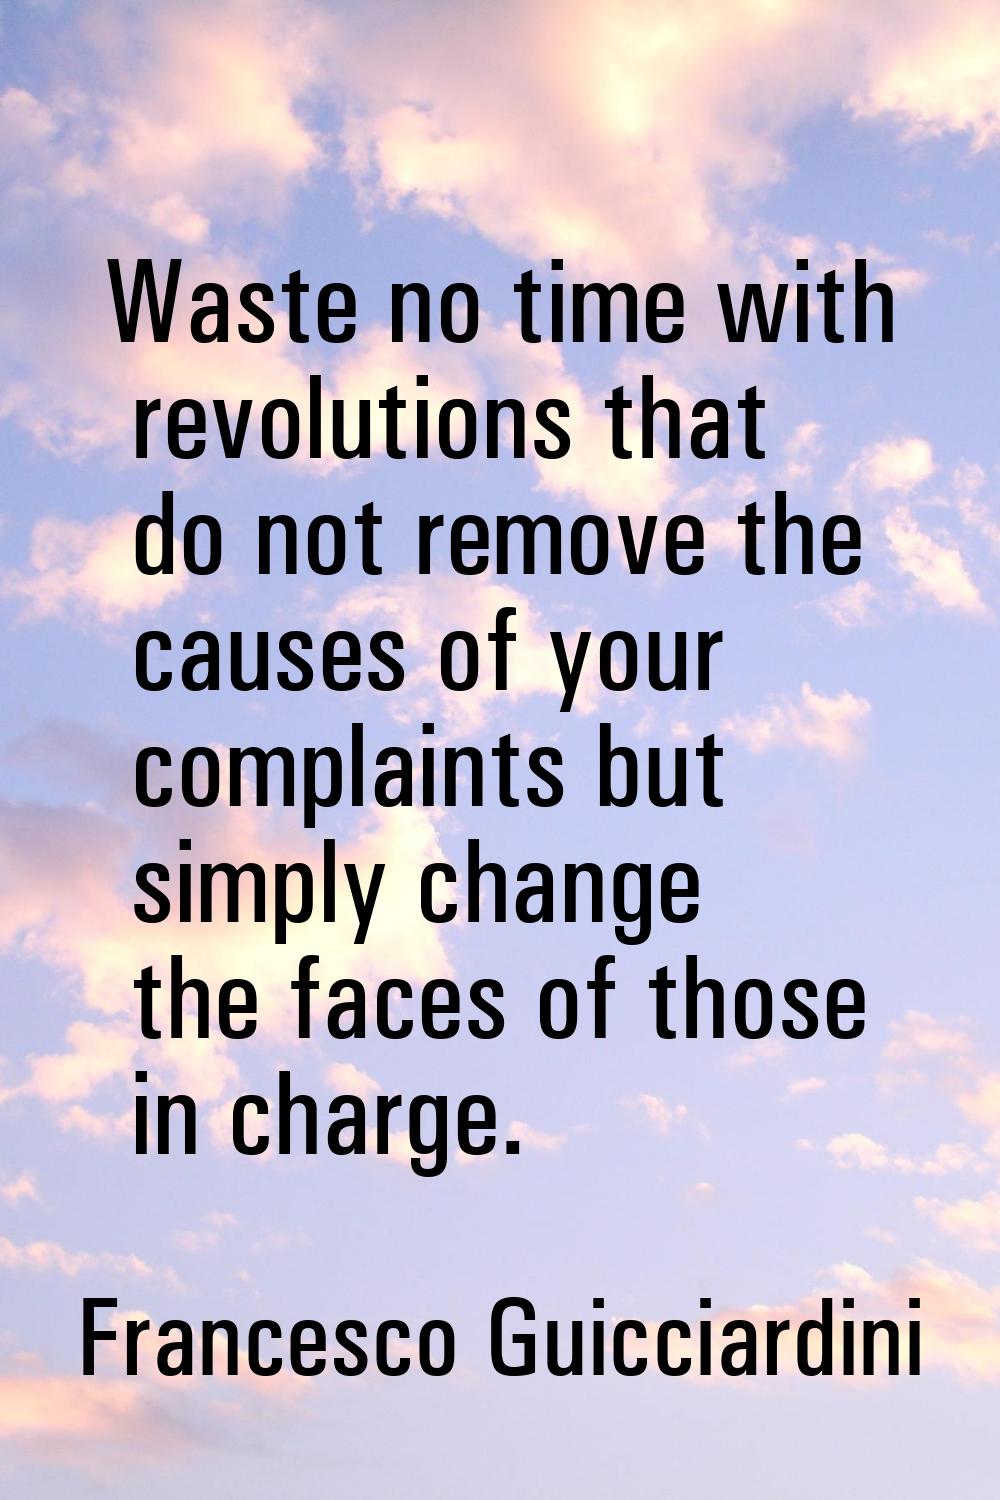 Waste no time with revolutions that do not remove the causes of your complaints but simply change t